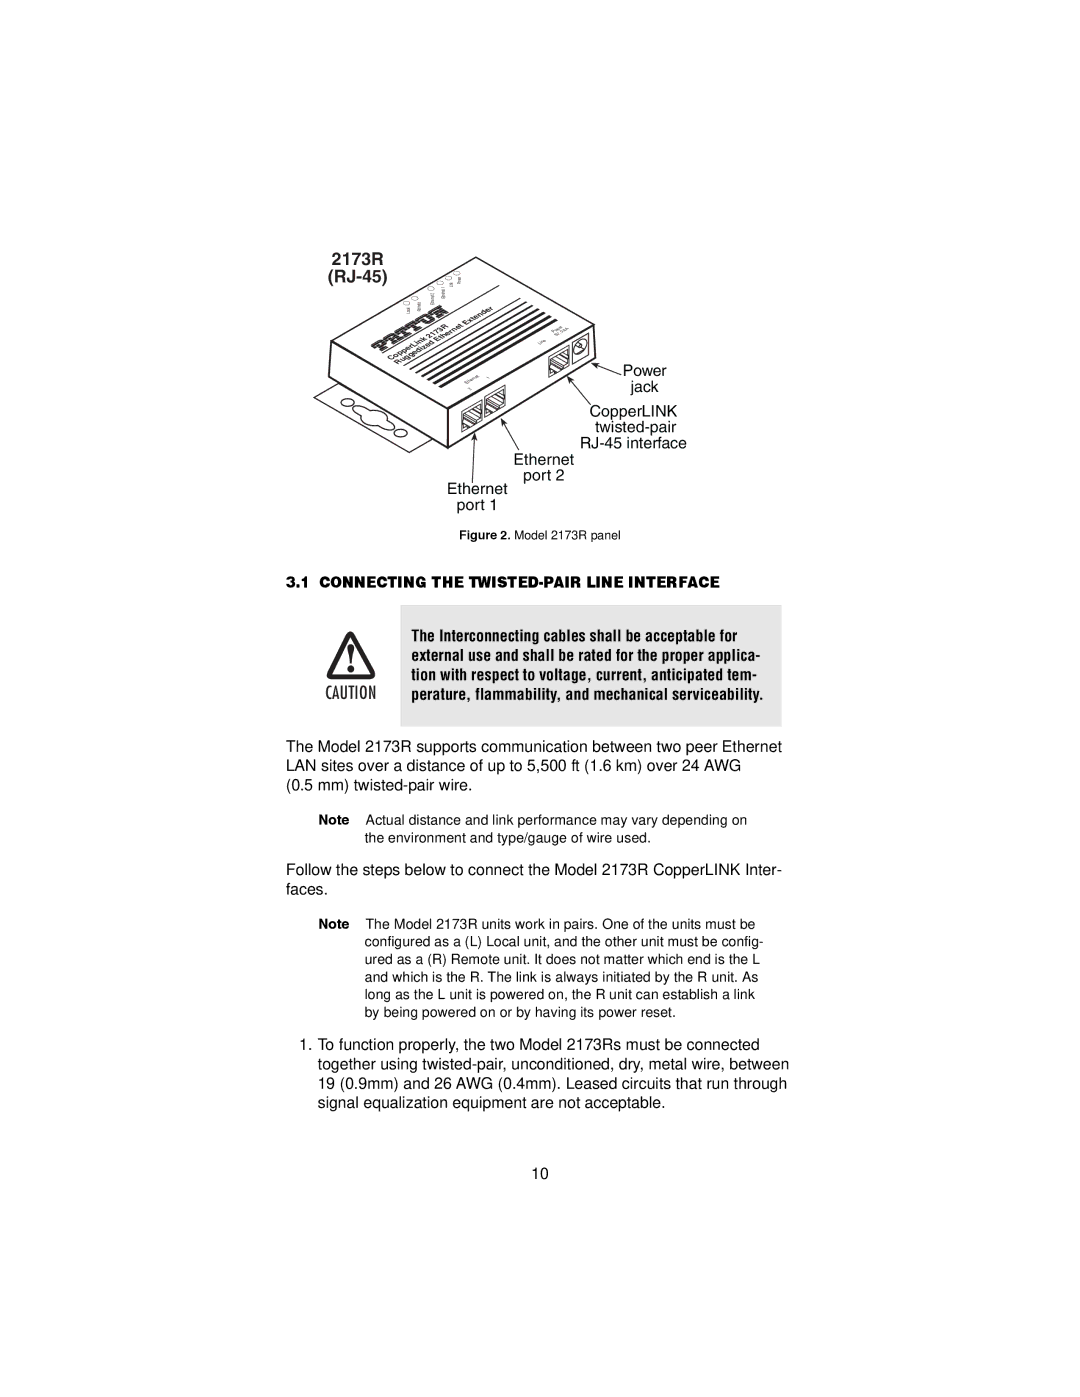 Patton electronic user manual 2173R RJ-45, Connecting the TWISTED-PAIR Line Interface 